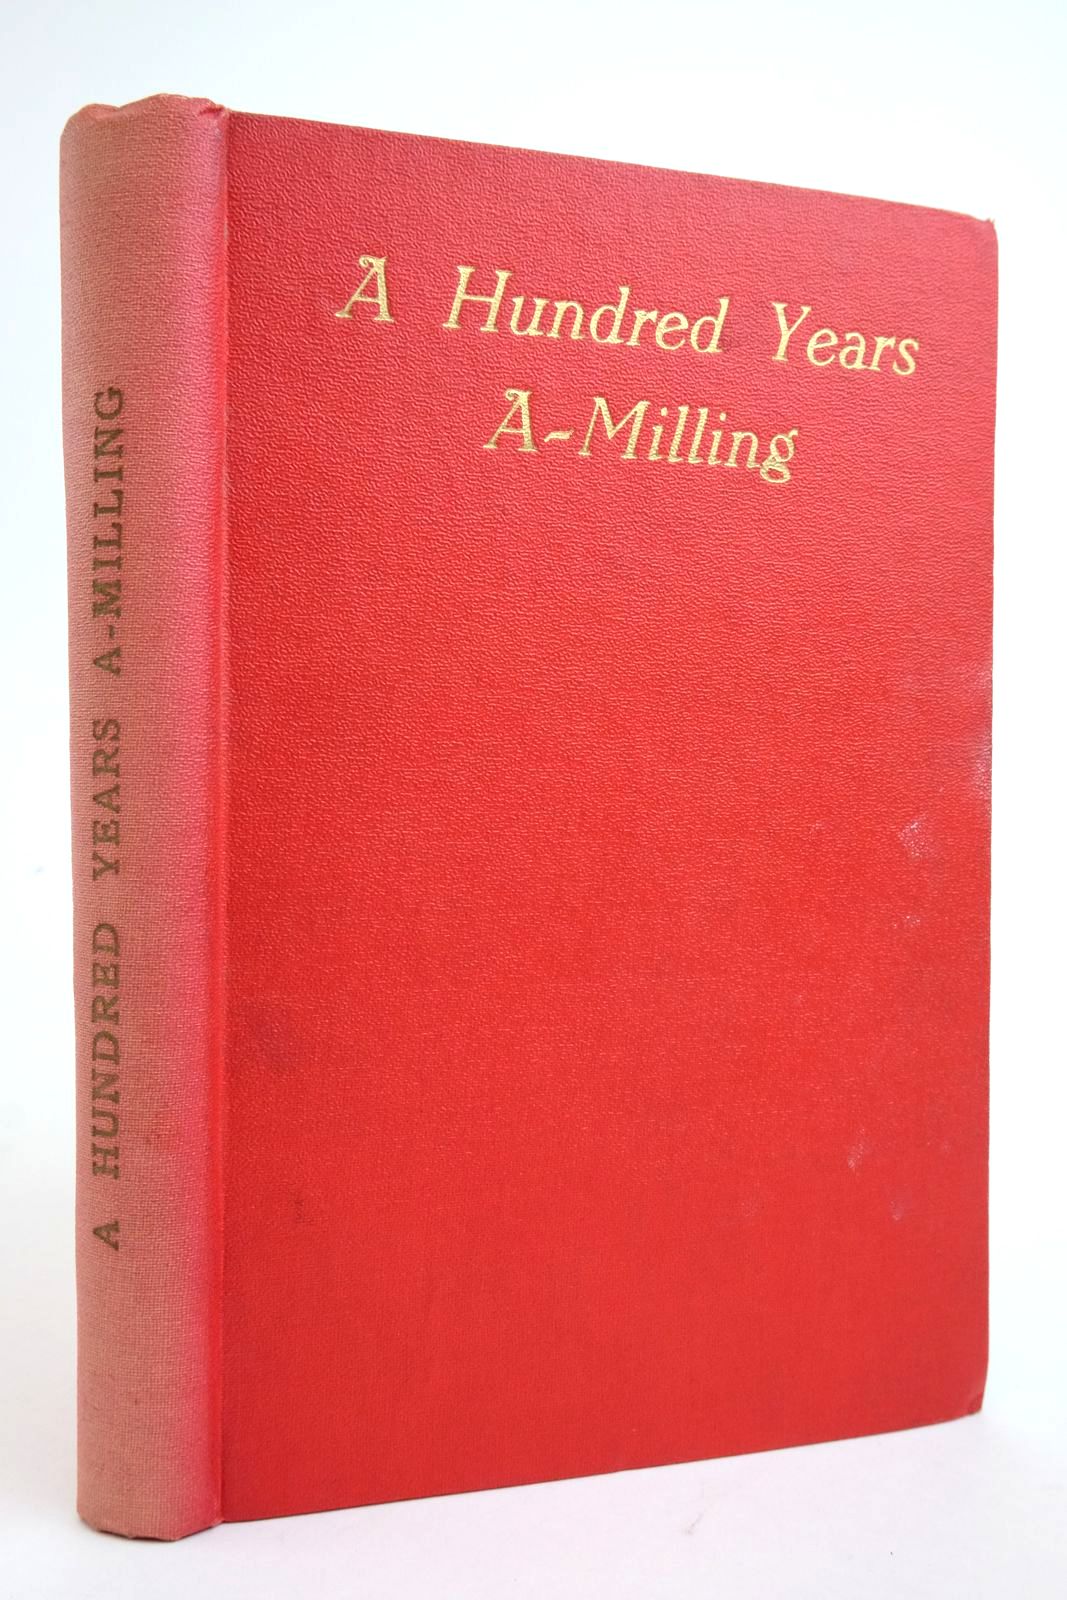 Photo of A HUNDRED YEARS A-MILLING: COMMEMORATING AN ULSTER MILL CENTENARY written by Scott, William Maddin illustrated by Ellis, Gray
Marshall, Margaret
Murnaghan, Colette published by W. & C. Scott, Ltd. (STOCK CODE: 2135961)  for sale by Stella & Rose's Books